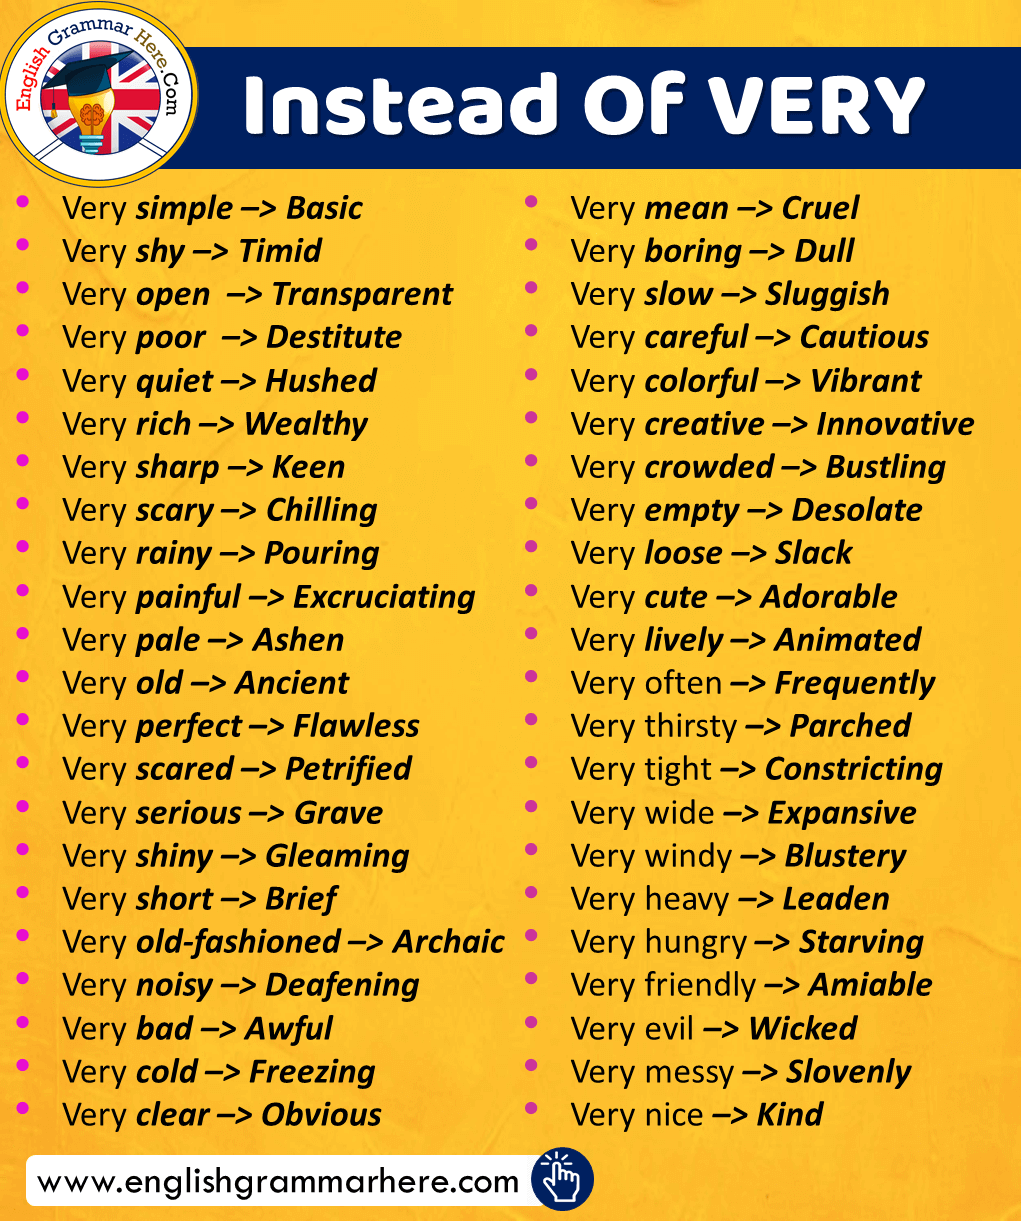 Use These English Words Instead of "Very"